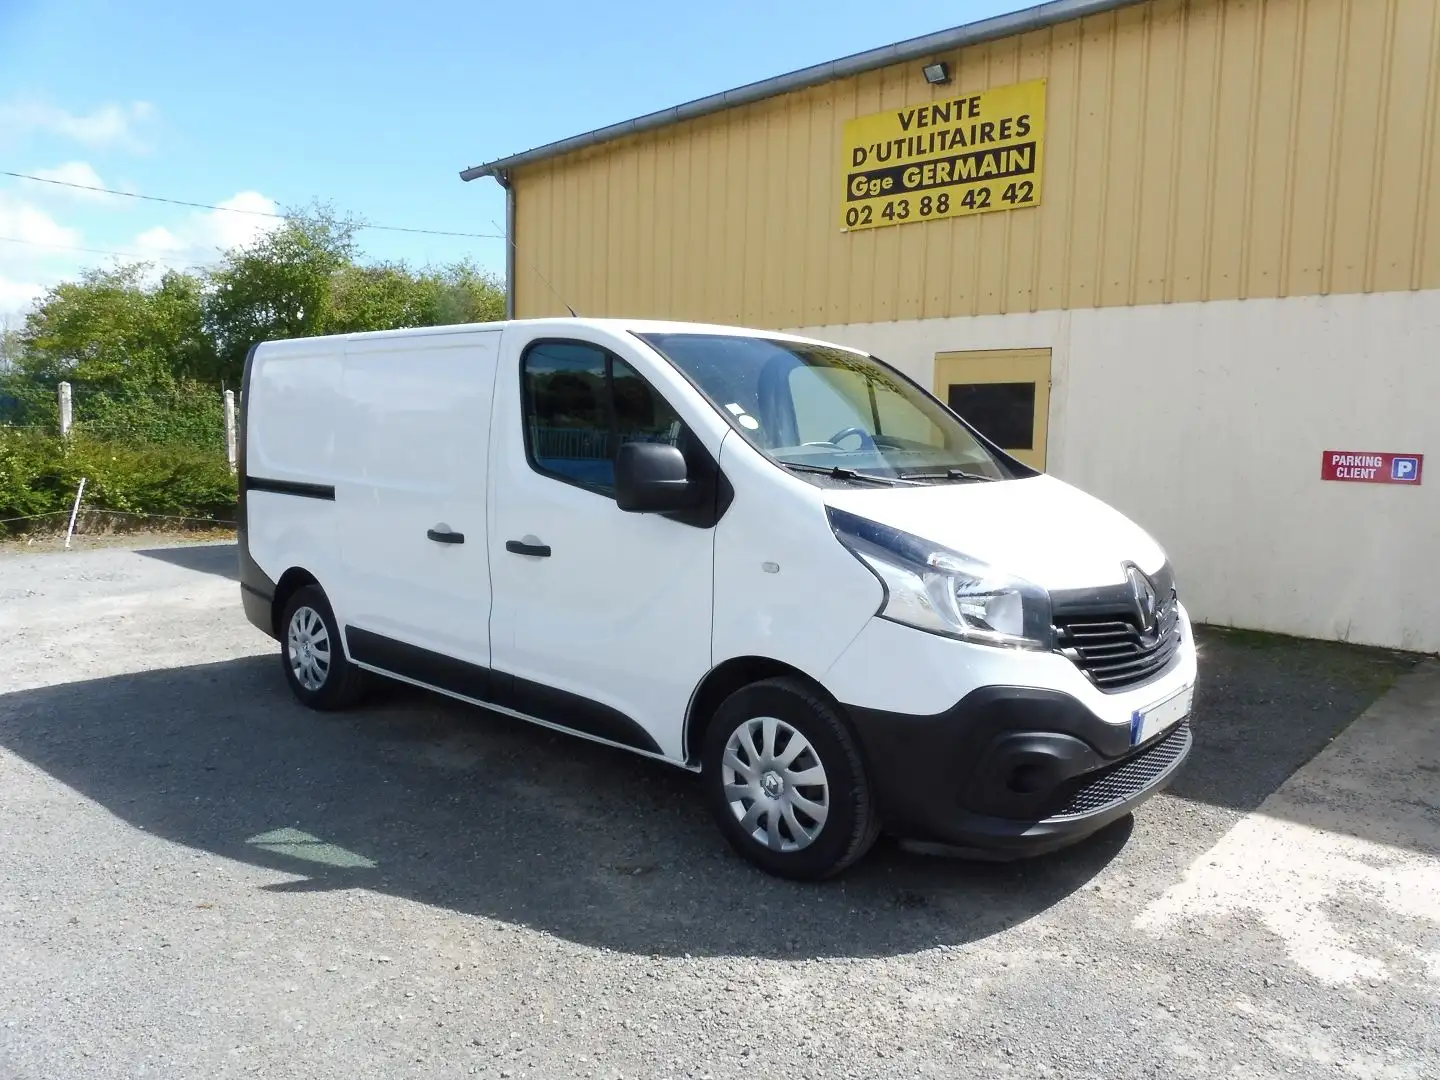 Renault Trafic L1H1 1000 1.6 DCI 125CH ENERGY CONFORT EURO6 - 1